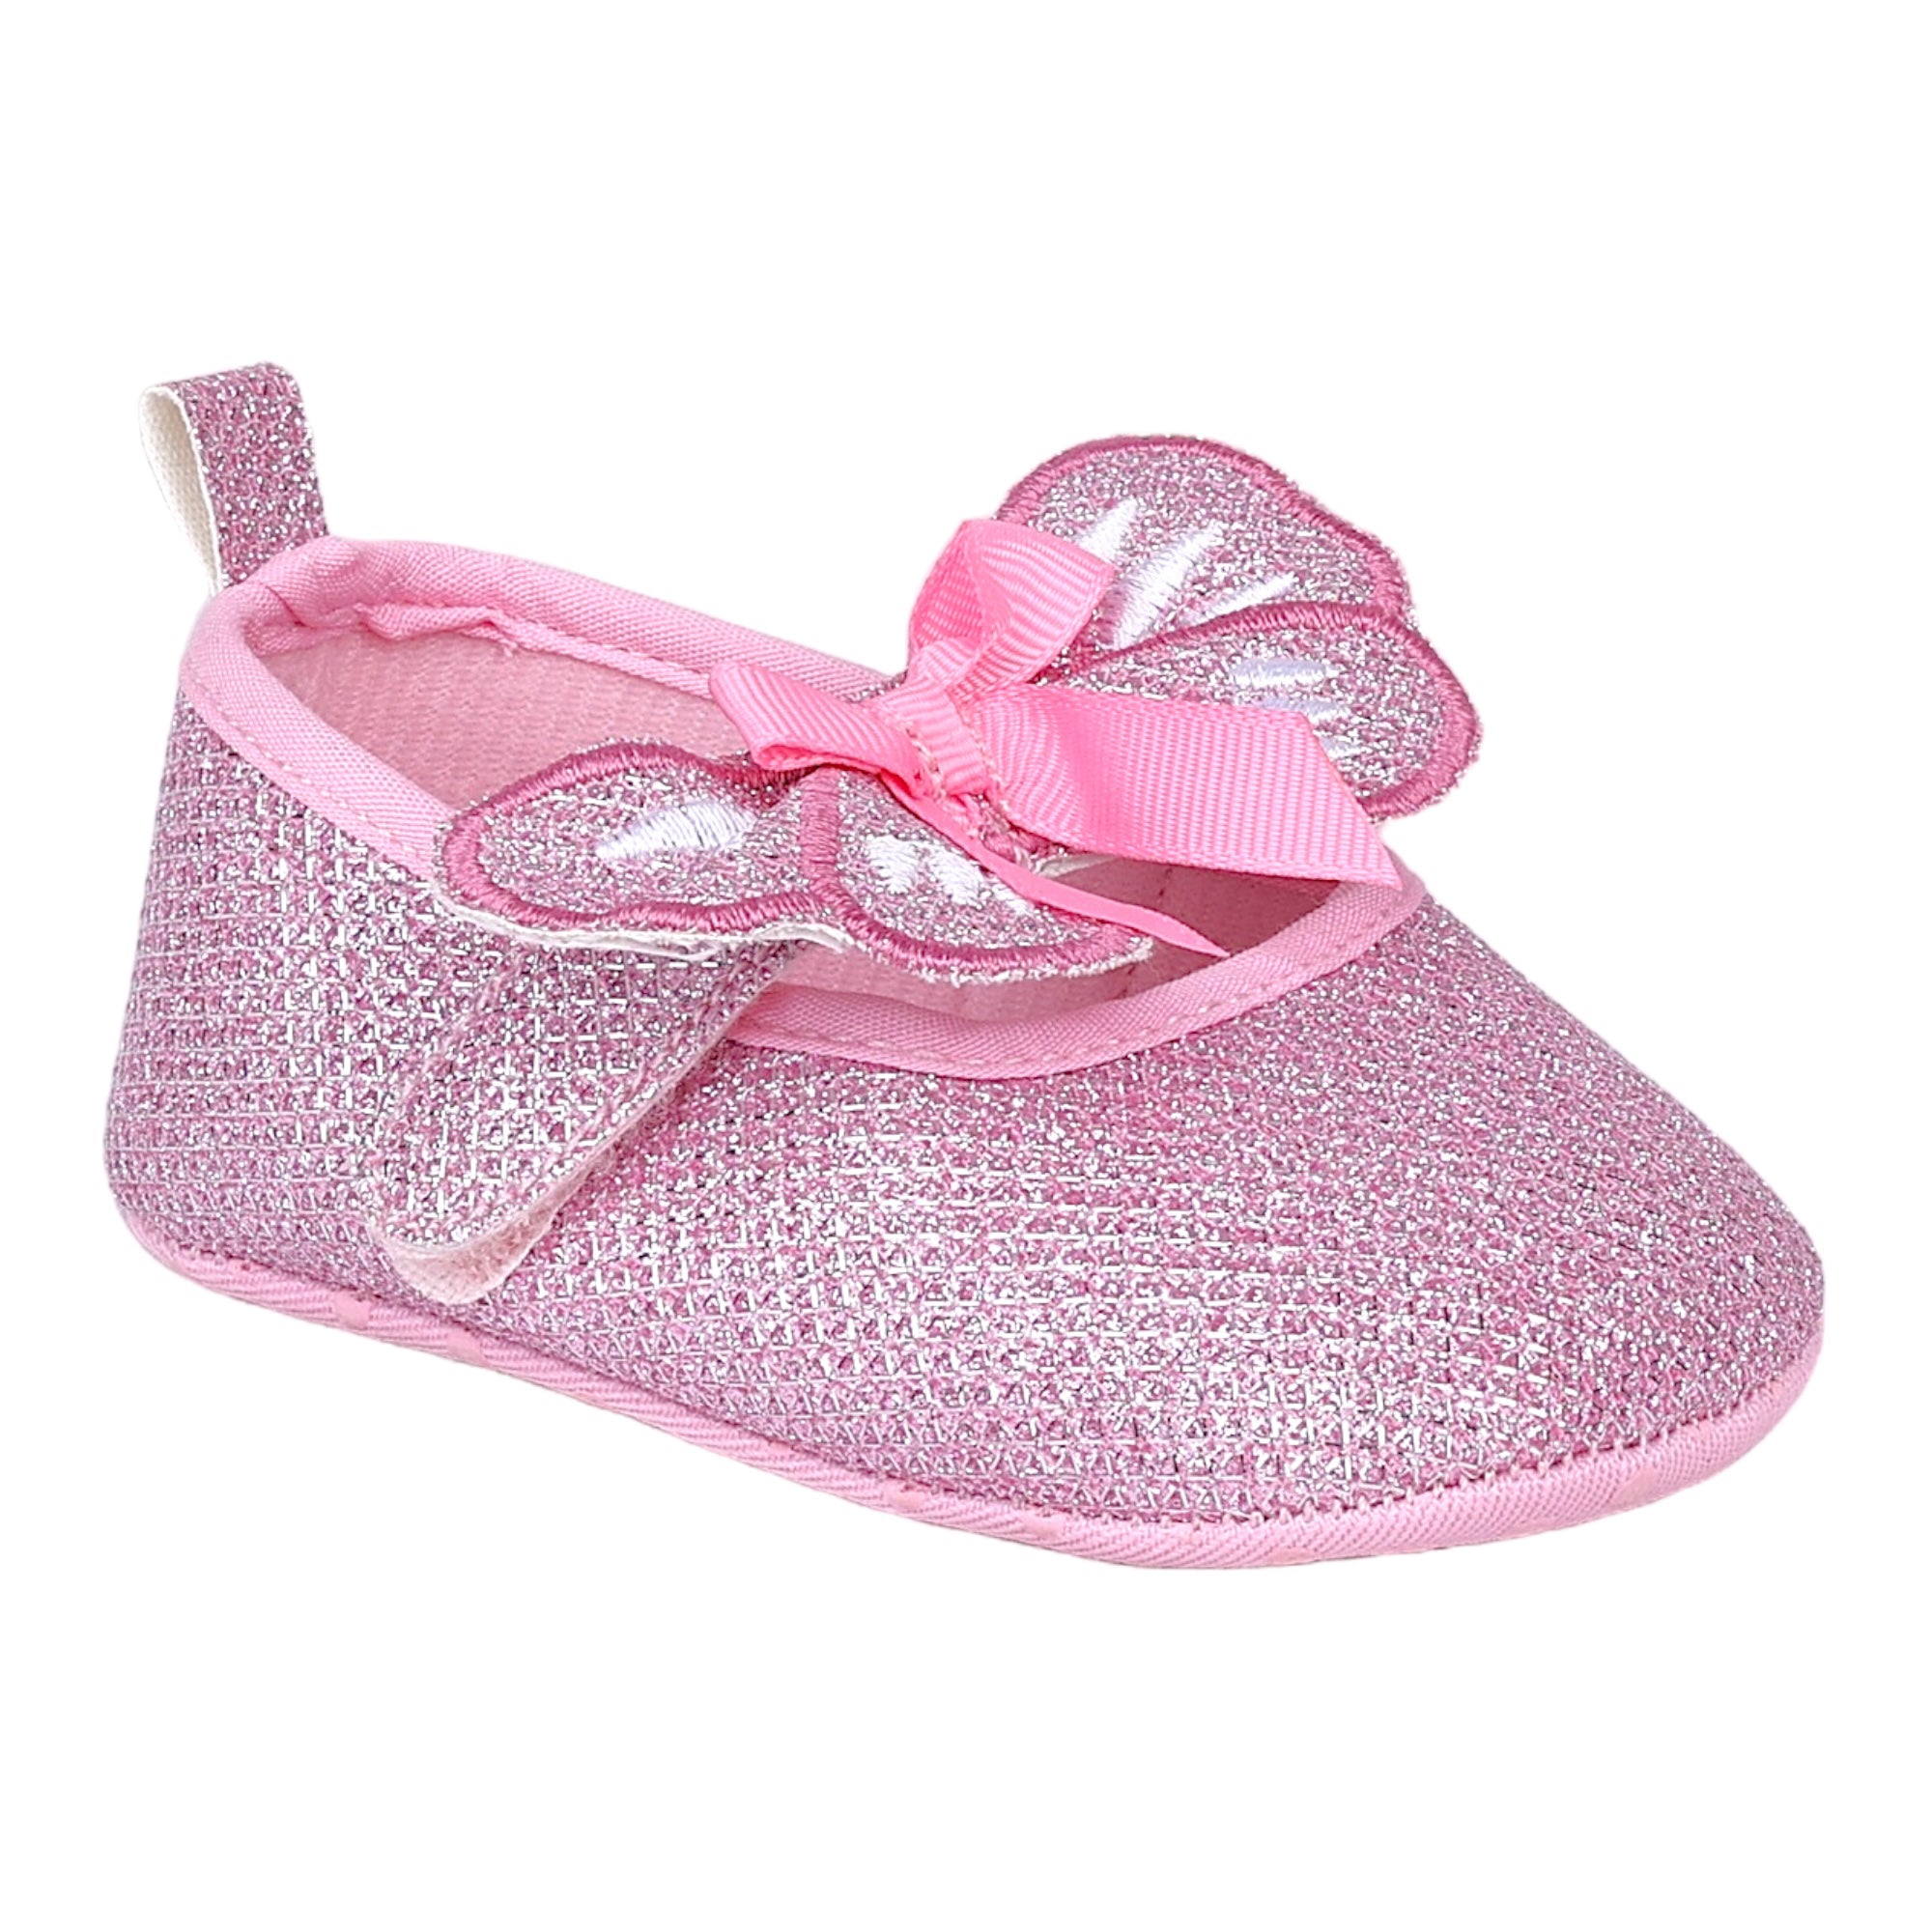 Baby Moo Butterfly Bow Shiny Party Anti-Skid Ballerina Booties - Pink